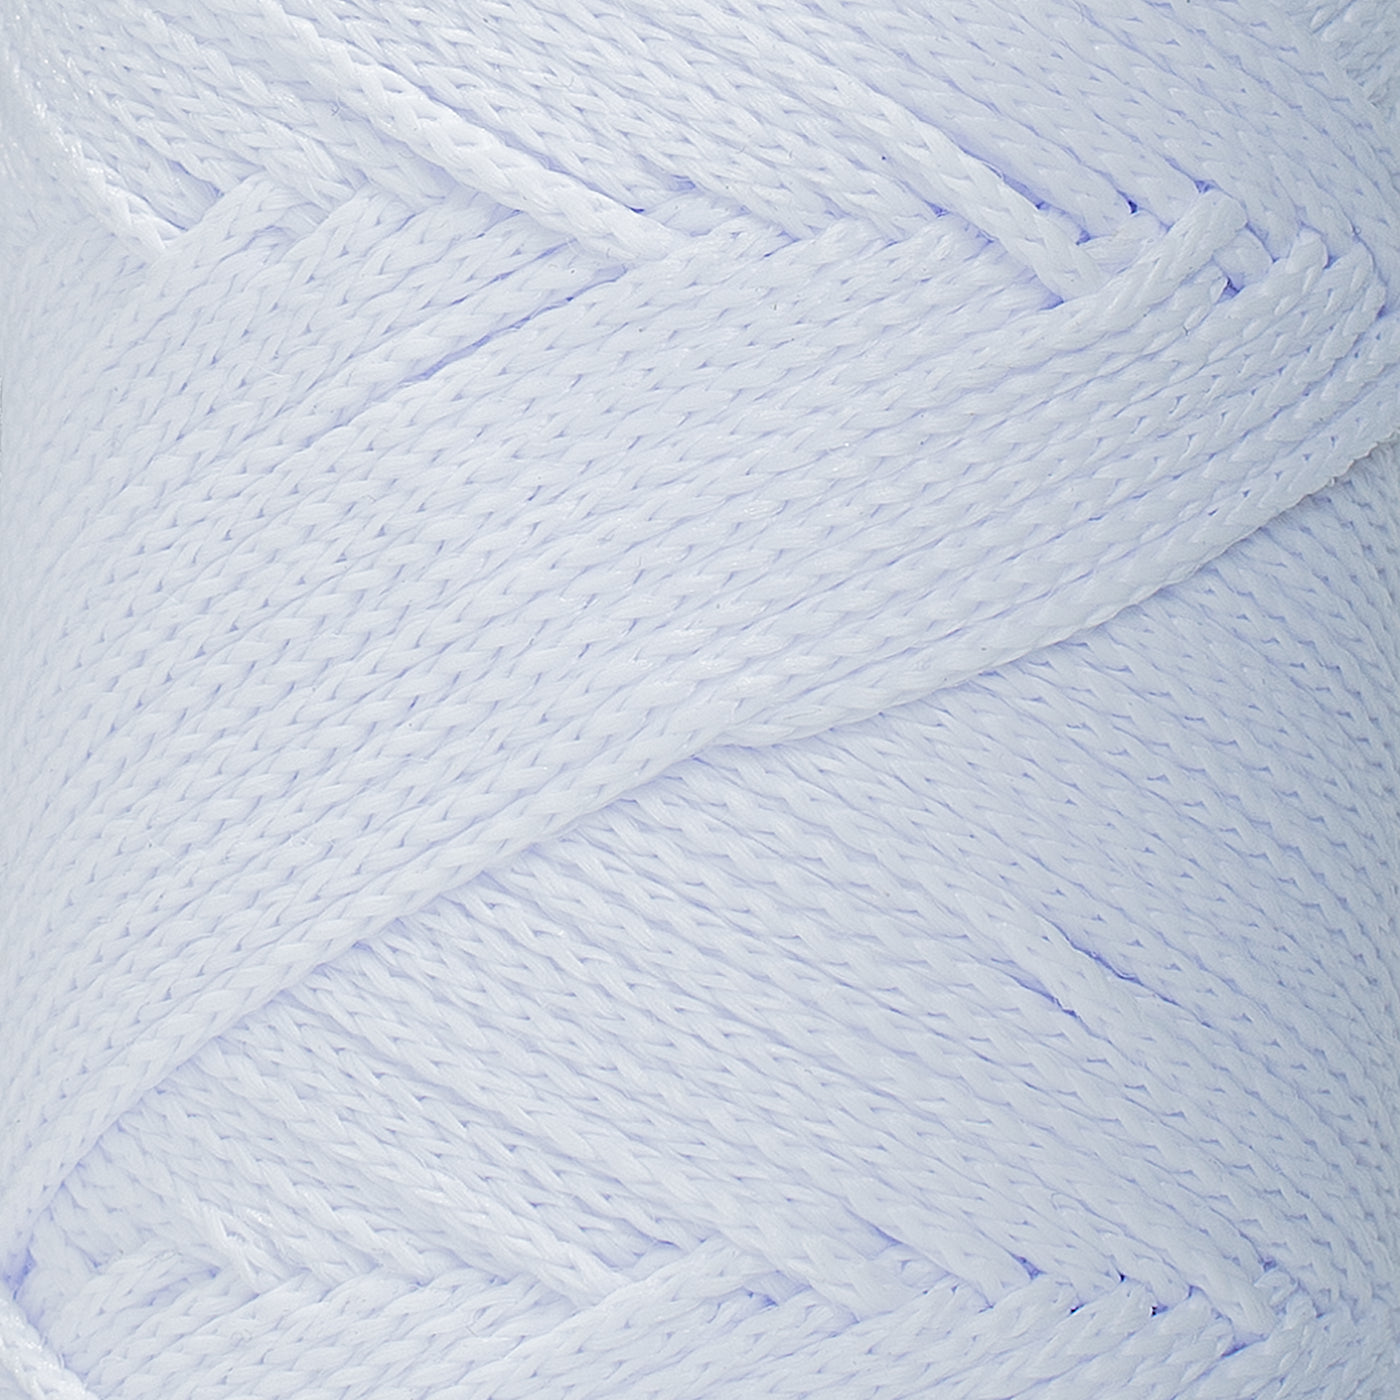 Outdoor 3 mm Macrame Braided Cord – White Color